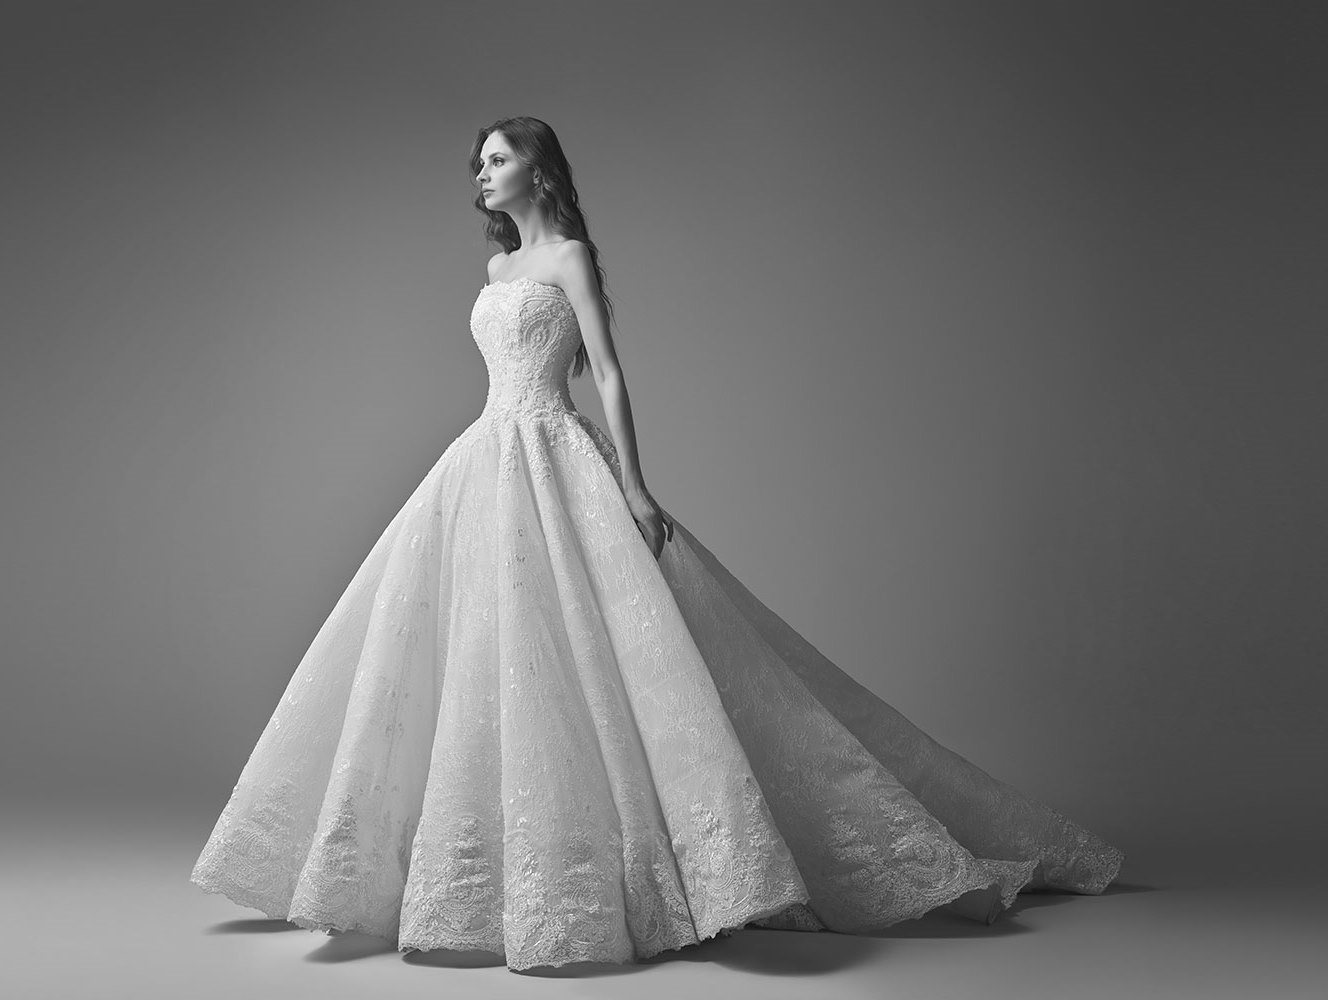 Stunning Wedding Dress fit for a Princess from Saiid Kobeisy's 2017 Collection